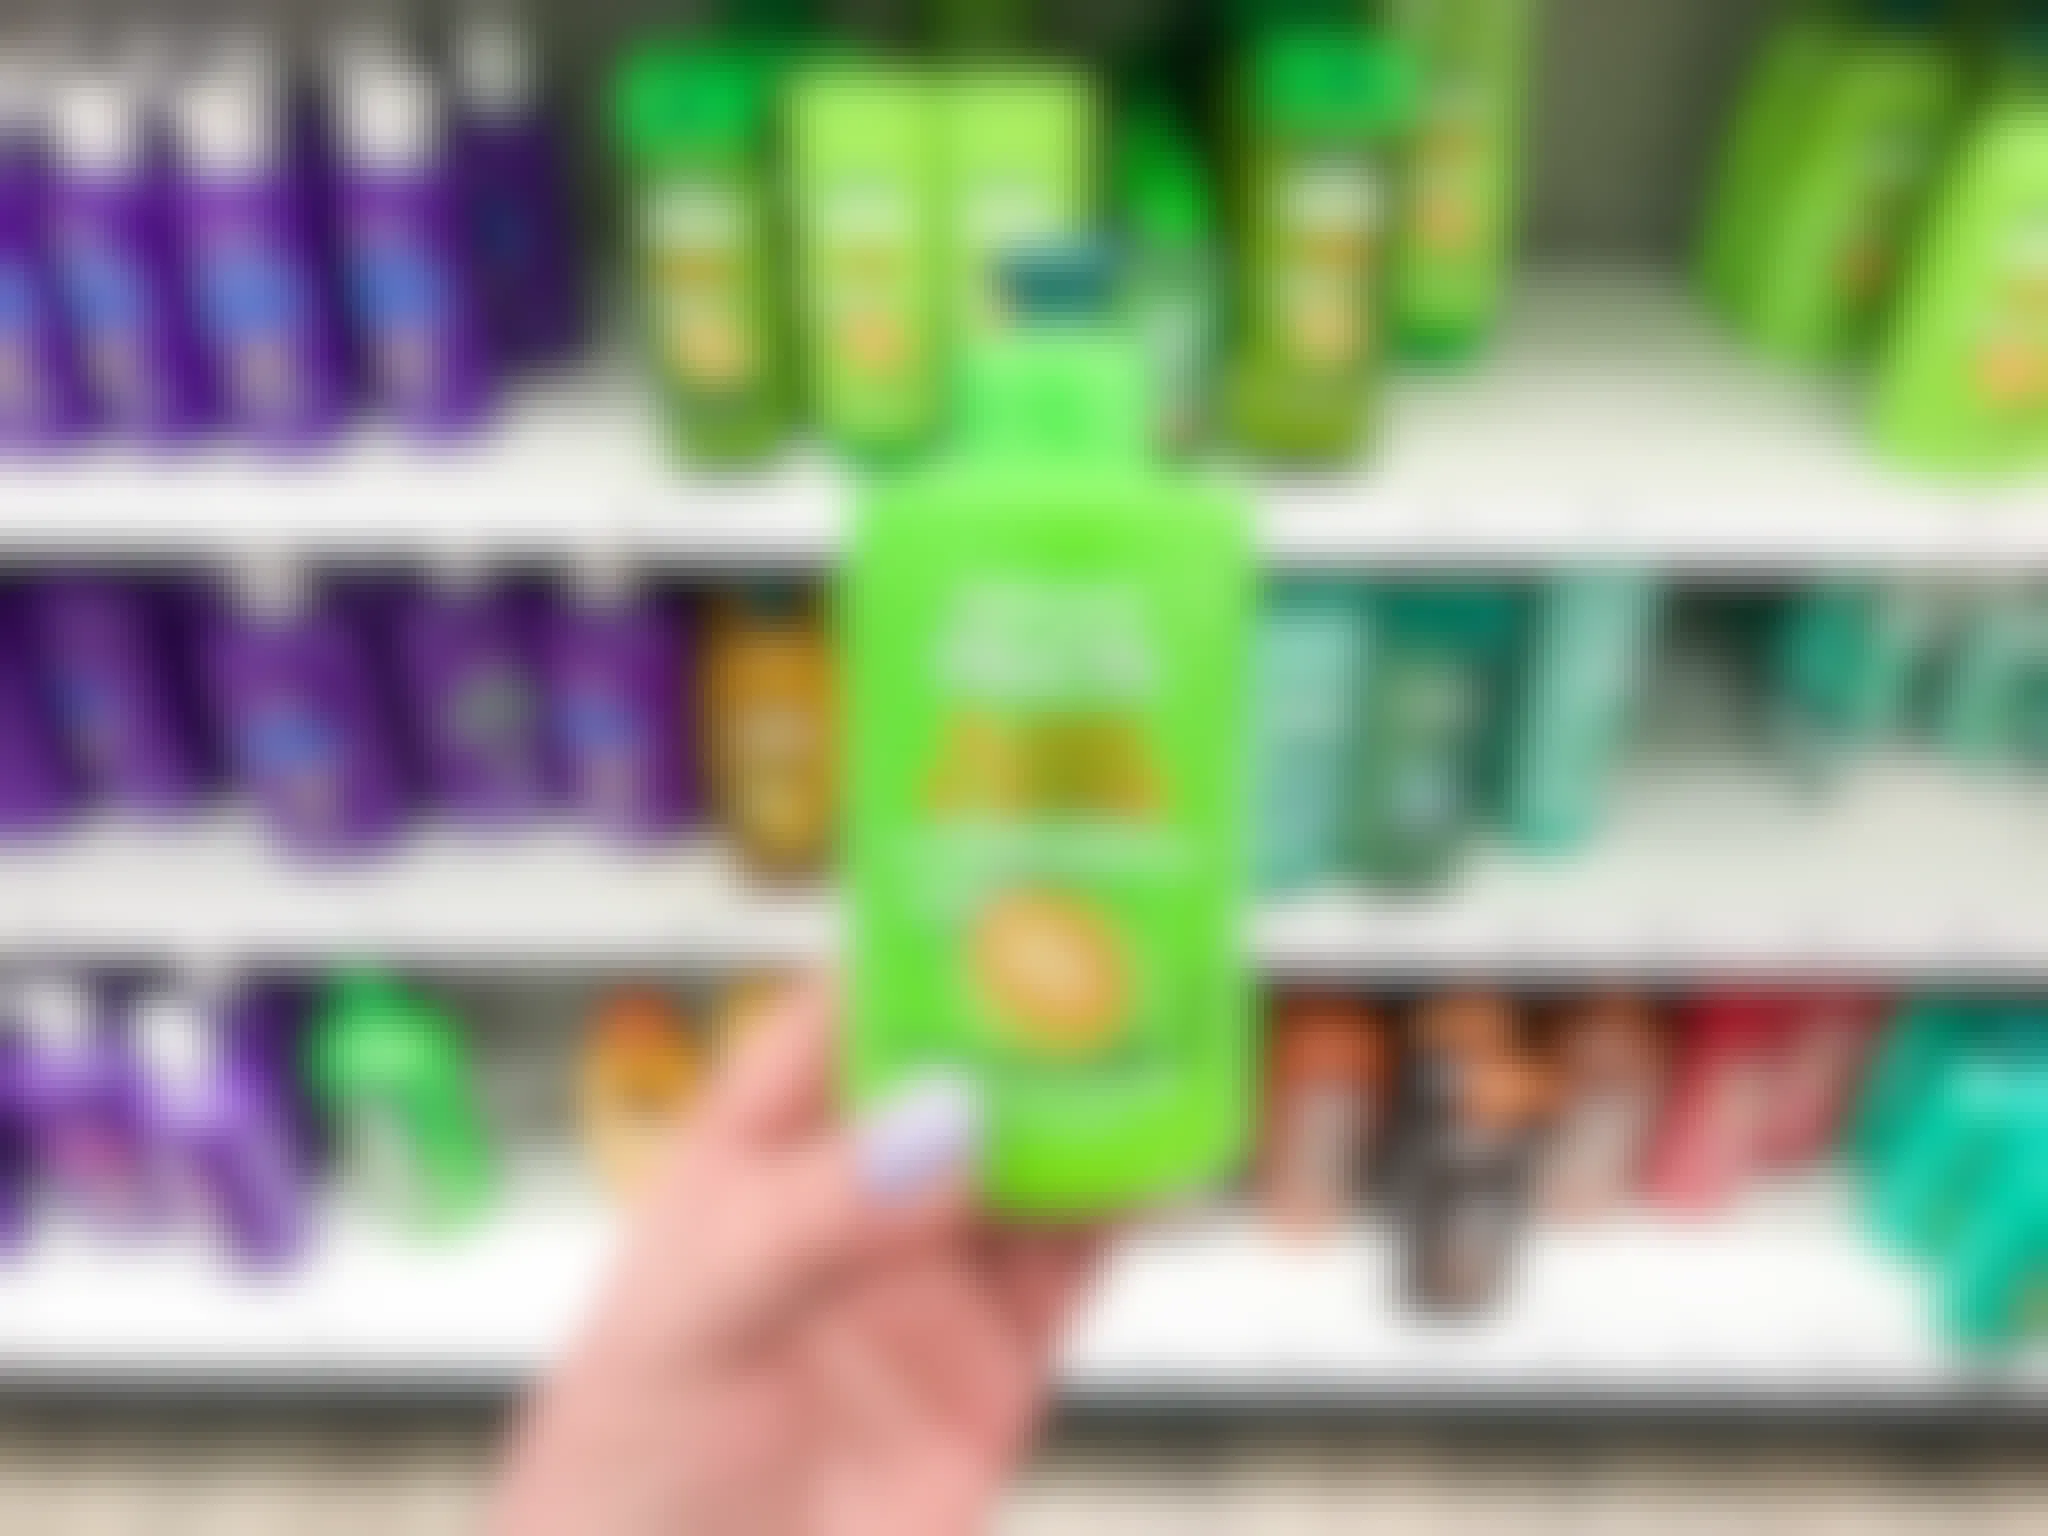 A person's hand holding up a bottle of Garnier Fructis Sleek & Shine Leave-in Conditioner in front of a shelf of haircare products at Target.